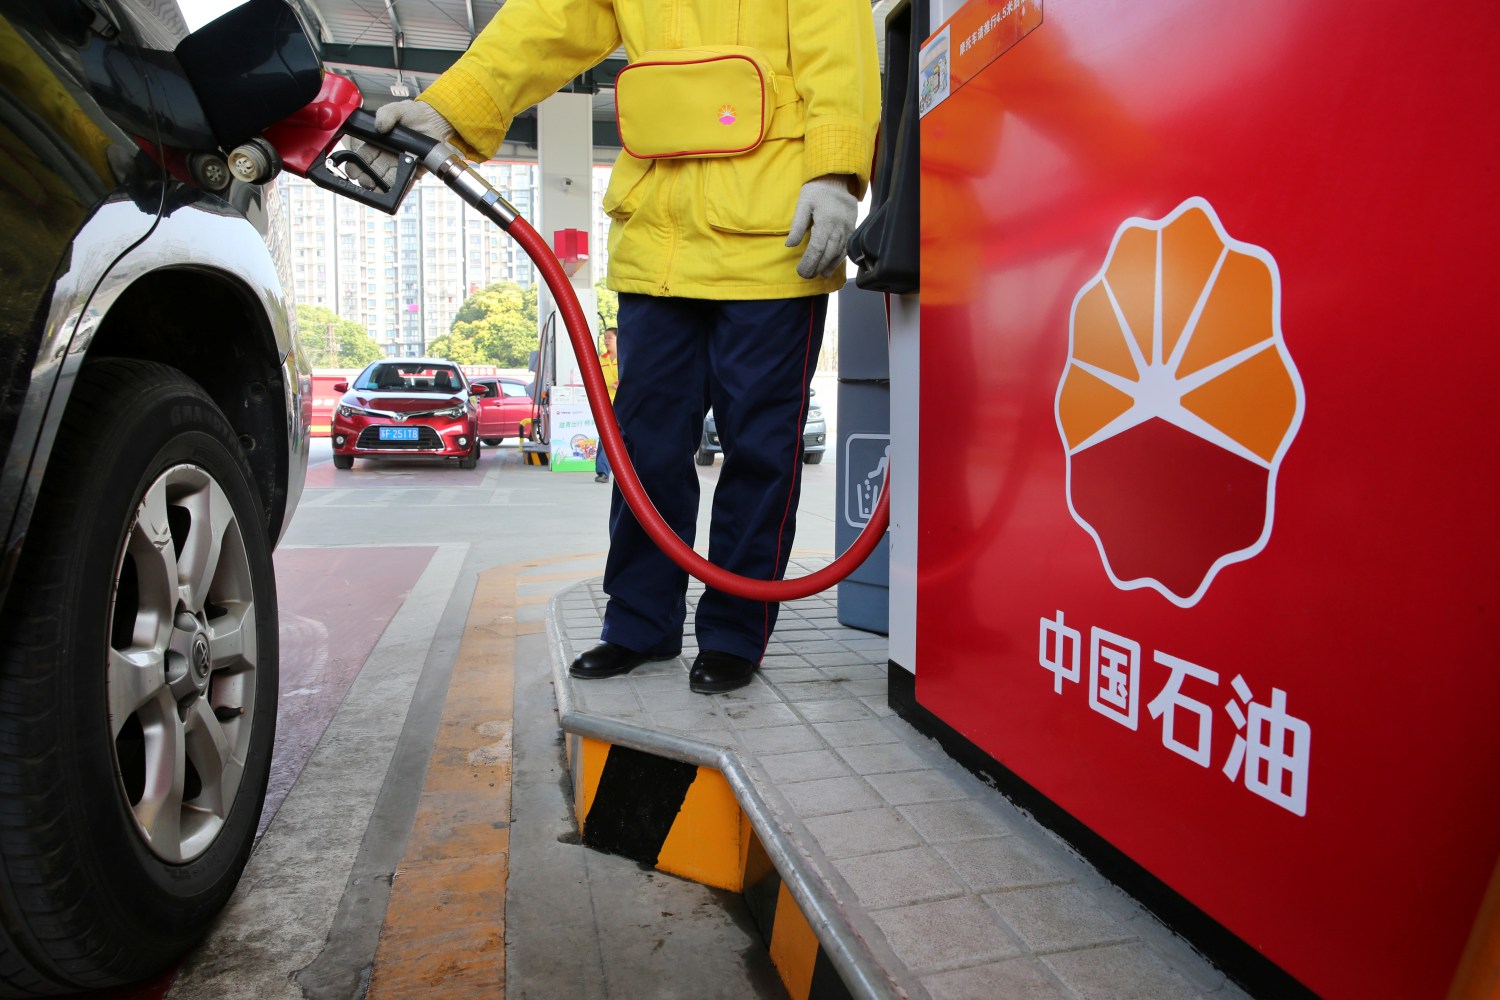 A gas station attendant pumps fuel into a customer's car at PetroChina's petrol station in Nantong, Jiangsu province, China March 28, 2018. Picture taken March 28, 2018. REUTERS/Stringer ATTENTION EDITORS - THIS IMAGE WAS PROVIDED BY A THIRD PARTY. CHINA OUT. - RC1D409DBC40